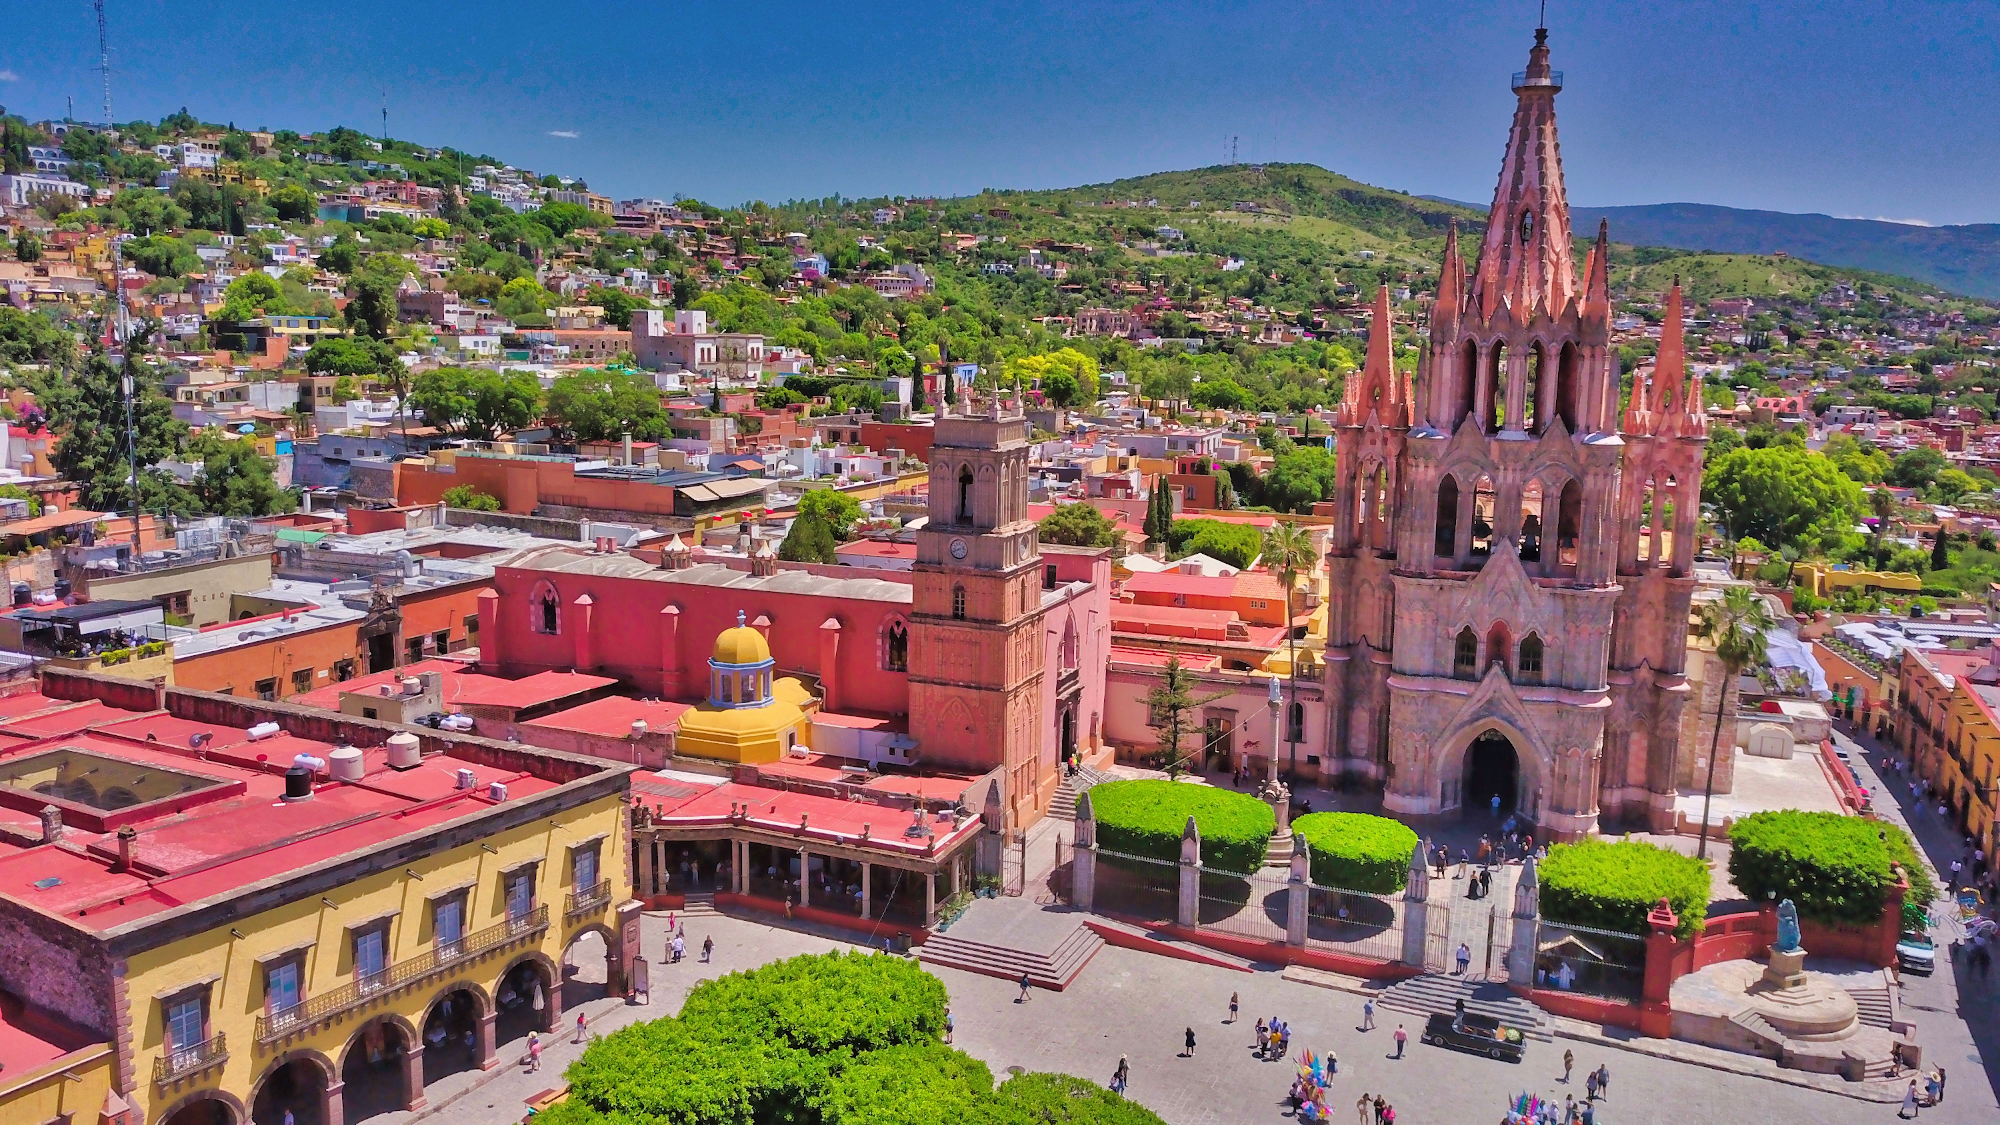 Colorful San Miguel de Allende from high perspective